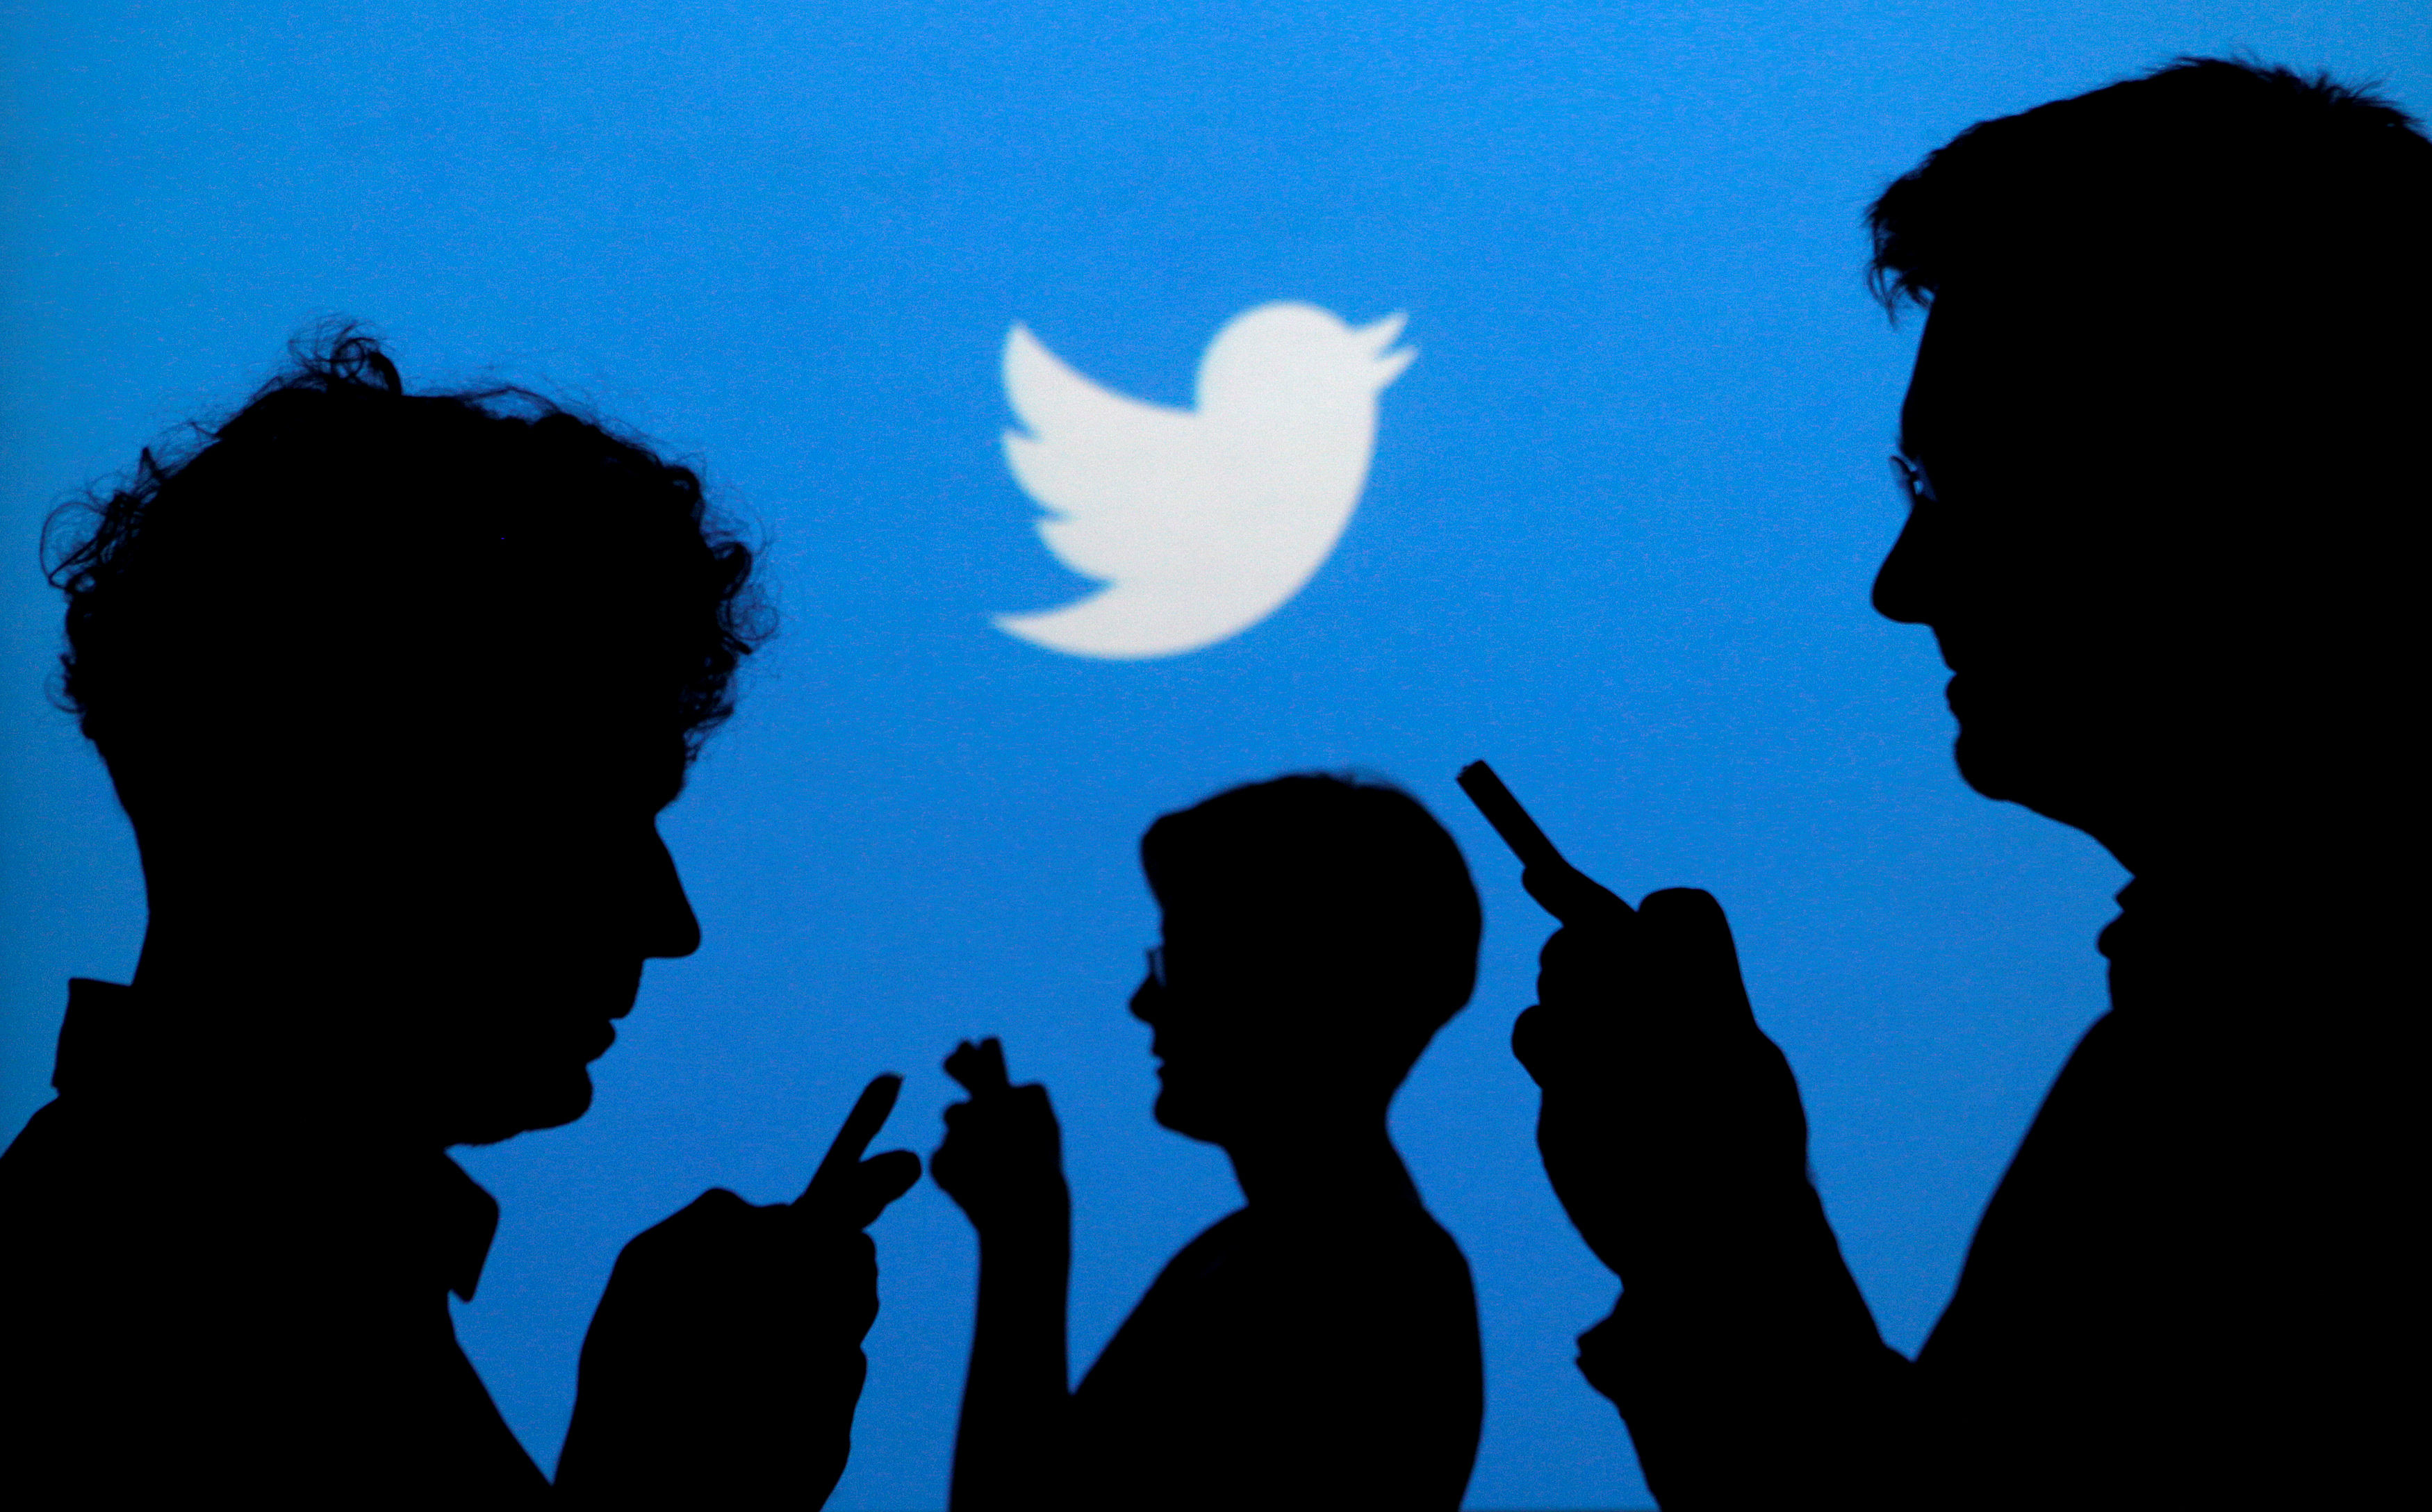 Despite global attention on the intrusion, which has shaken confidence in Twitter and the security provided by other technology companies, the basic details of who were the people responsible, and how they did it, have been a mystery. Representative image/Credit: Reuters Photo